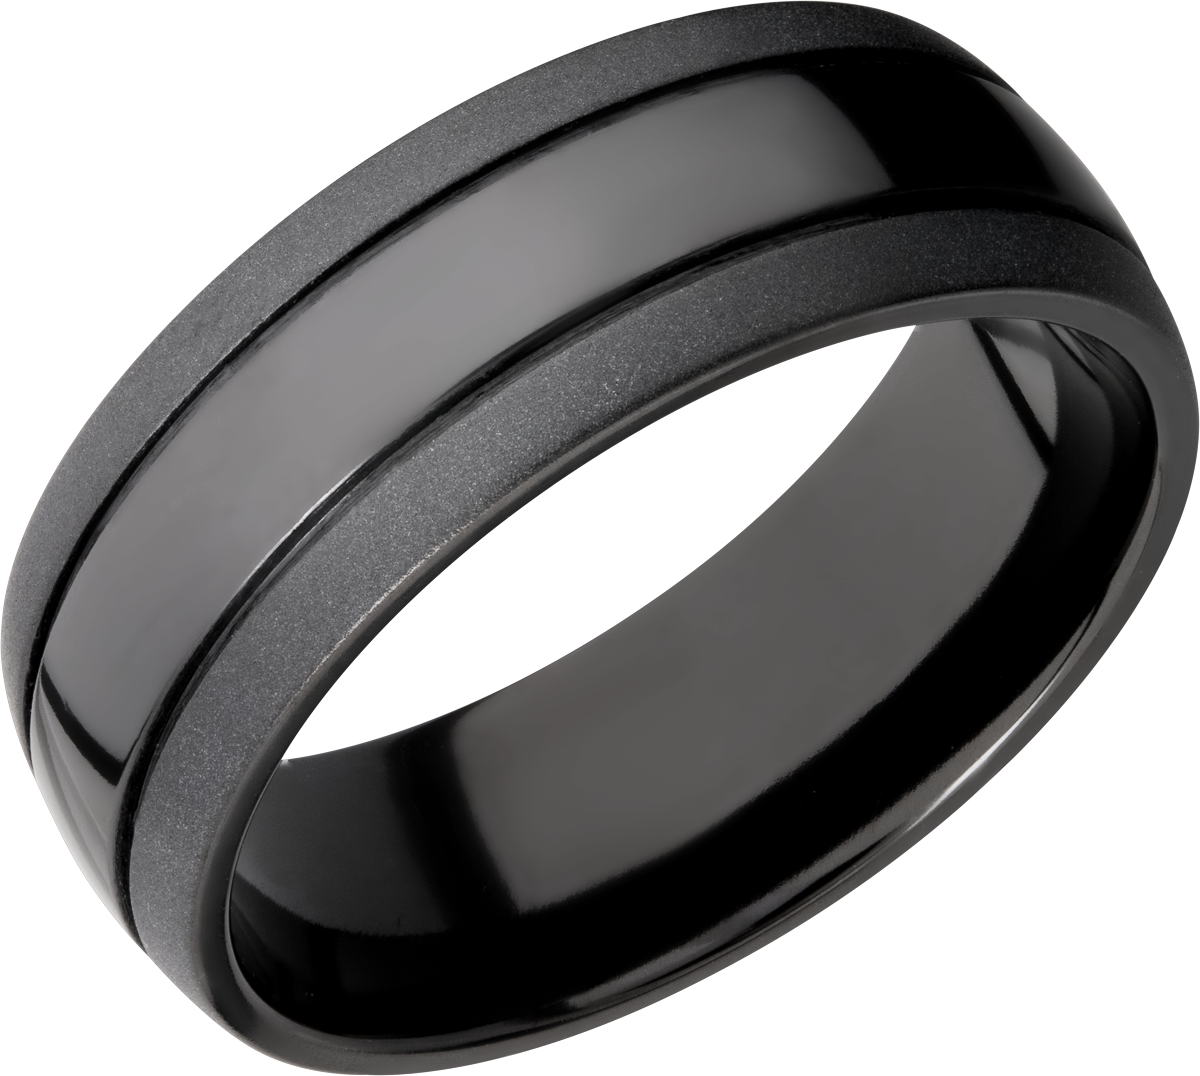 Black zirconium 8mm domed band with two grooves that are each 0.5mm wide spaced out over the top. P